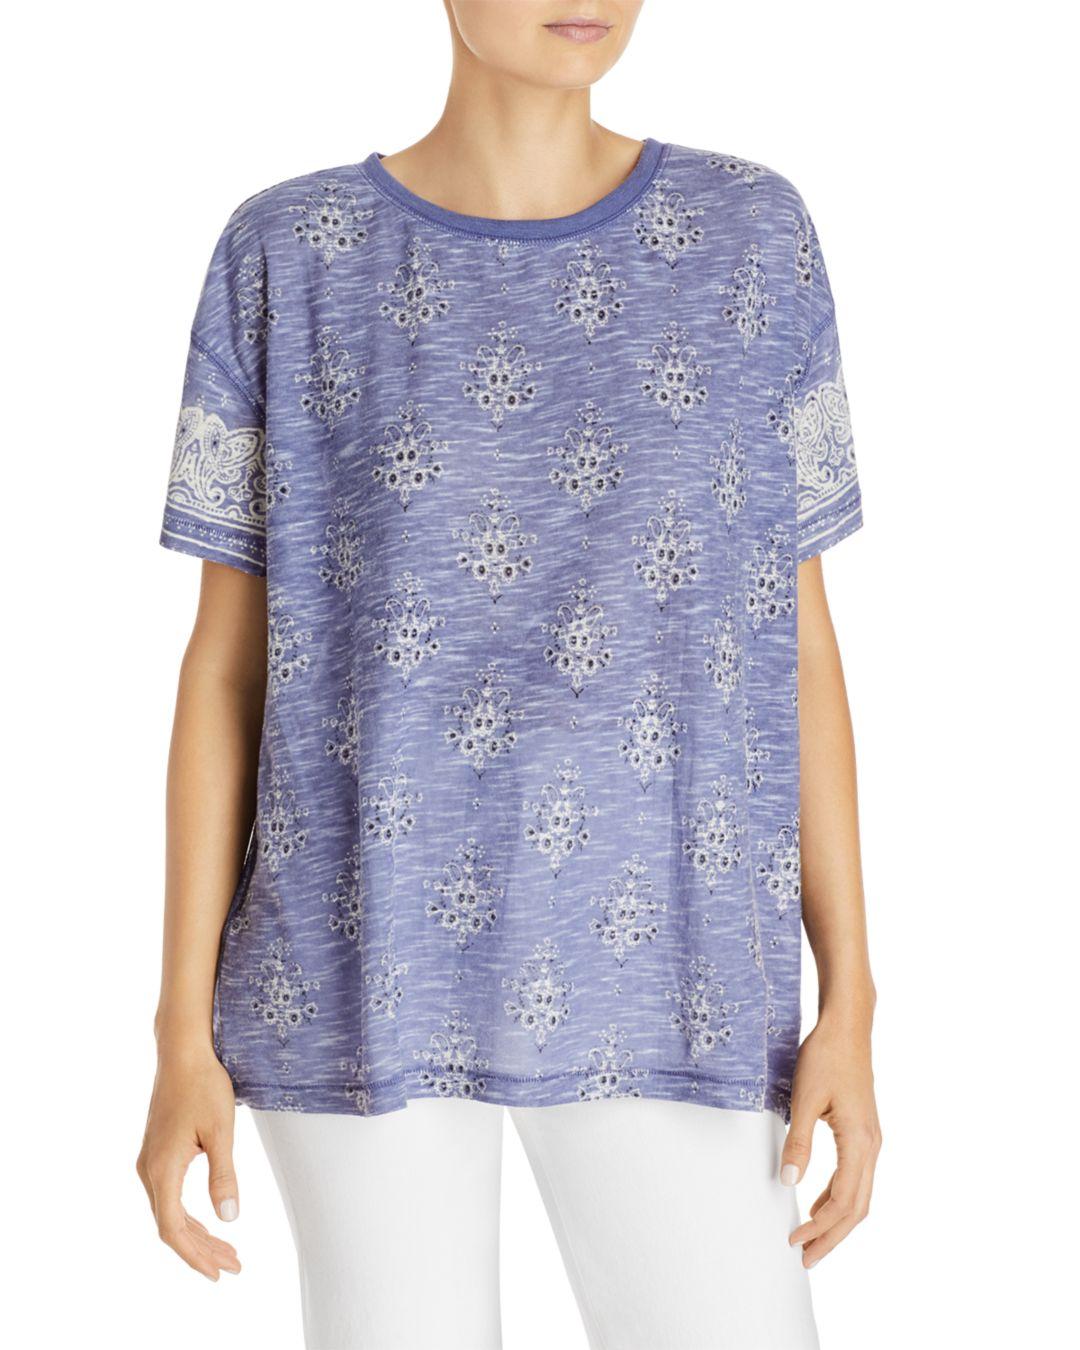 FREE PEOPLE Womens Blue Printed Short Sleeve Crew Neck T-Shirt S